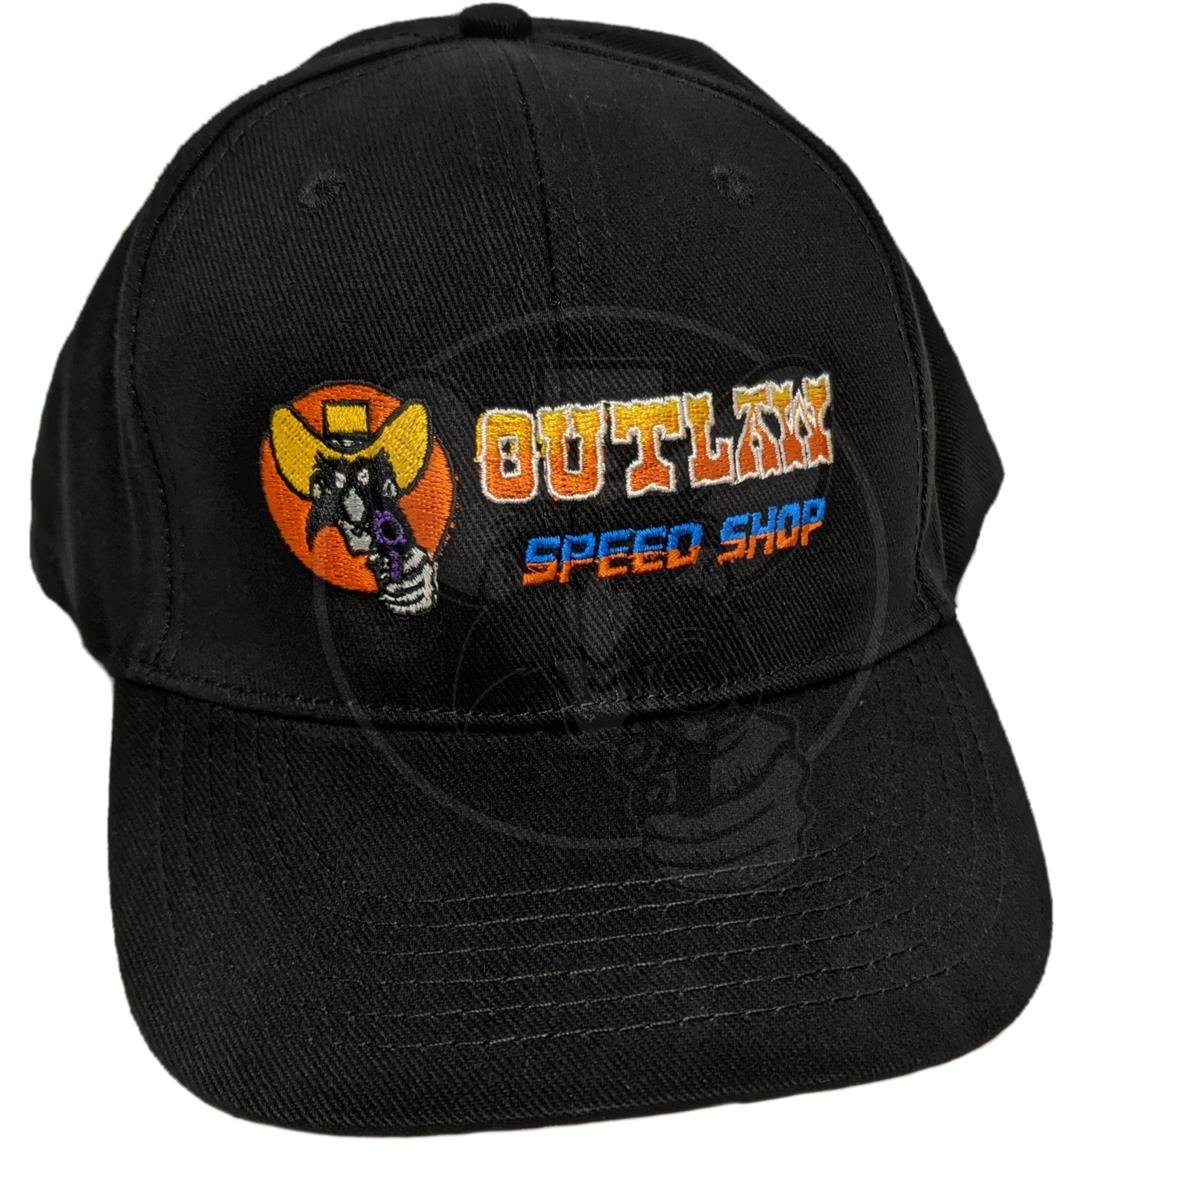 OUTLAW SPEED SHOP CAP HAT PEAKED BALL - BLACK